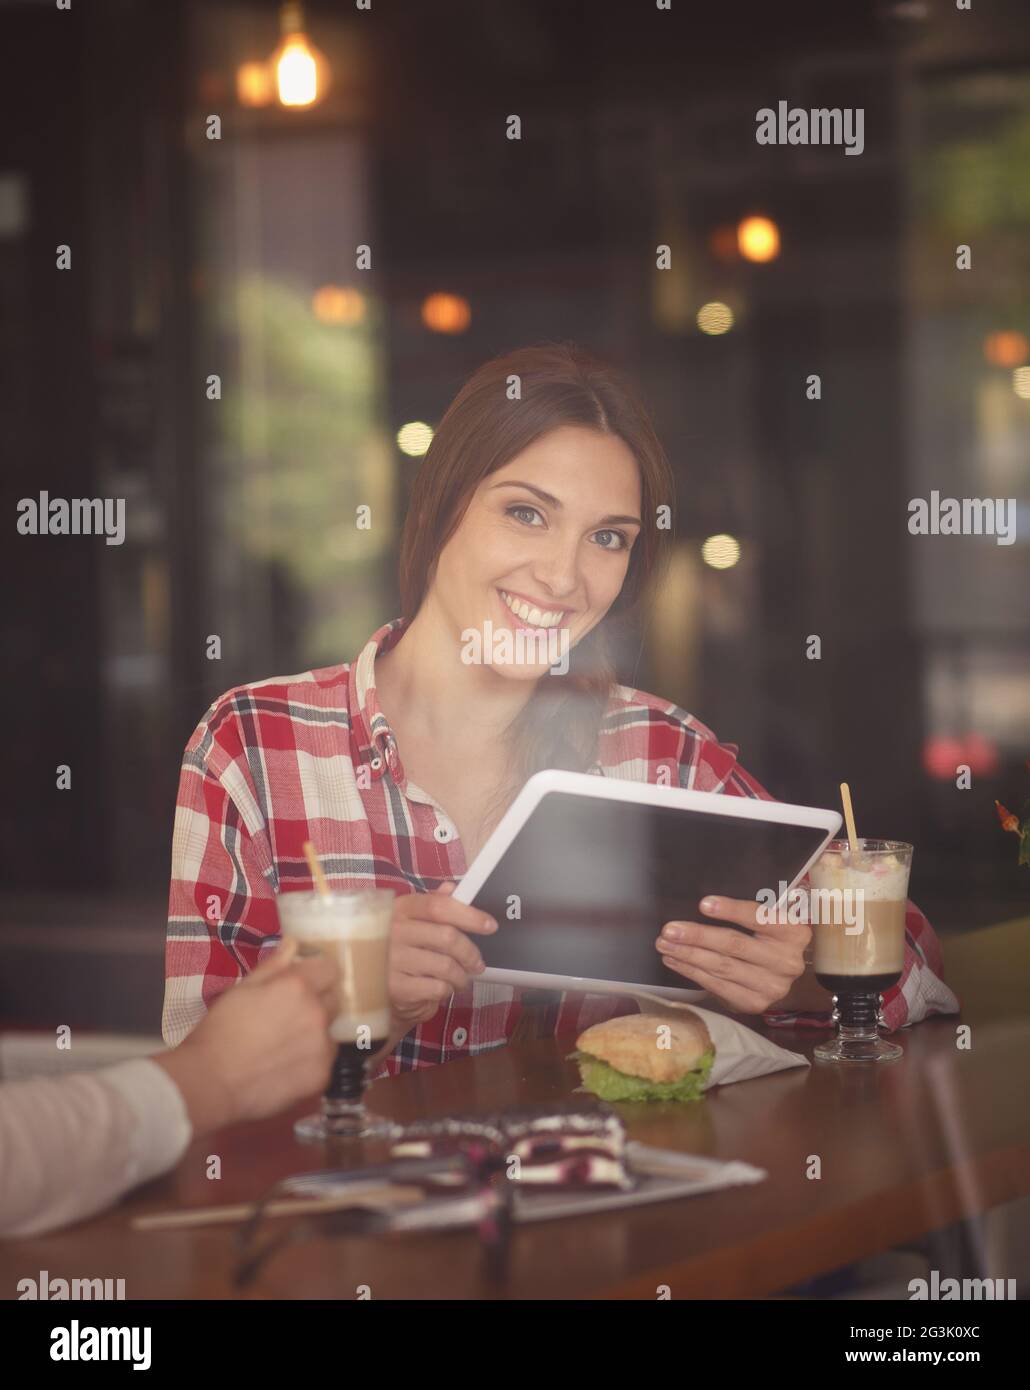 Freelance lady working in cafe Stock Photo